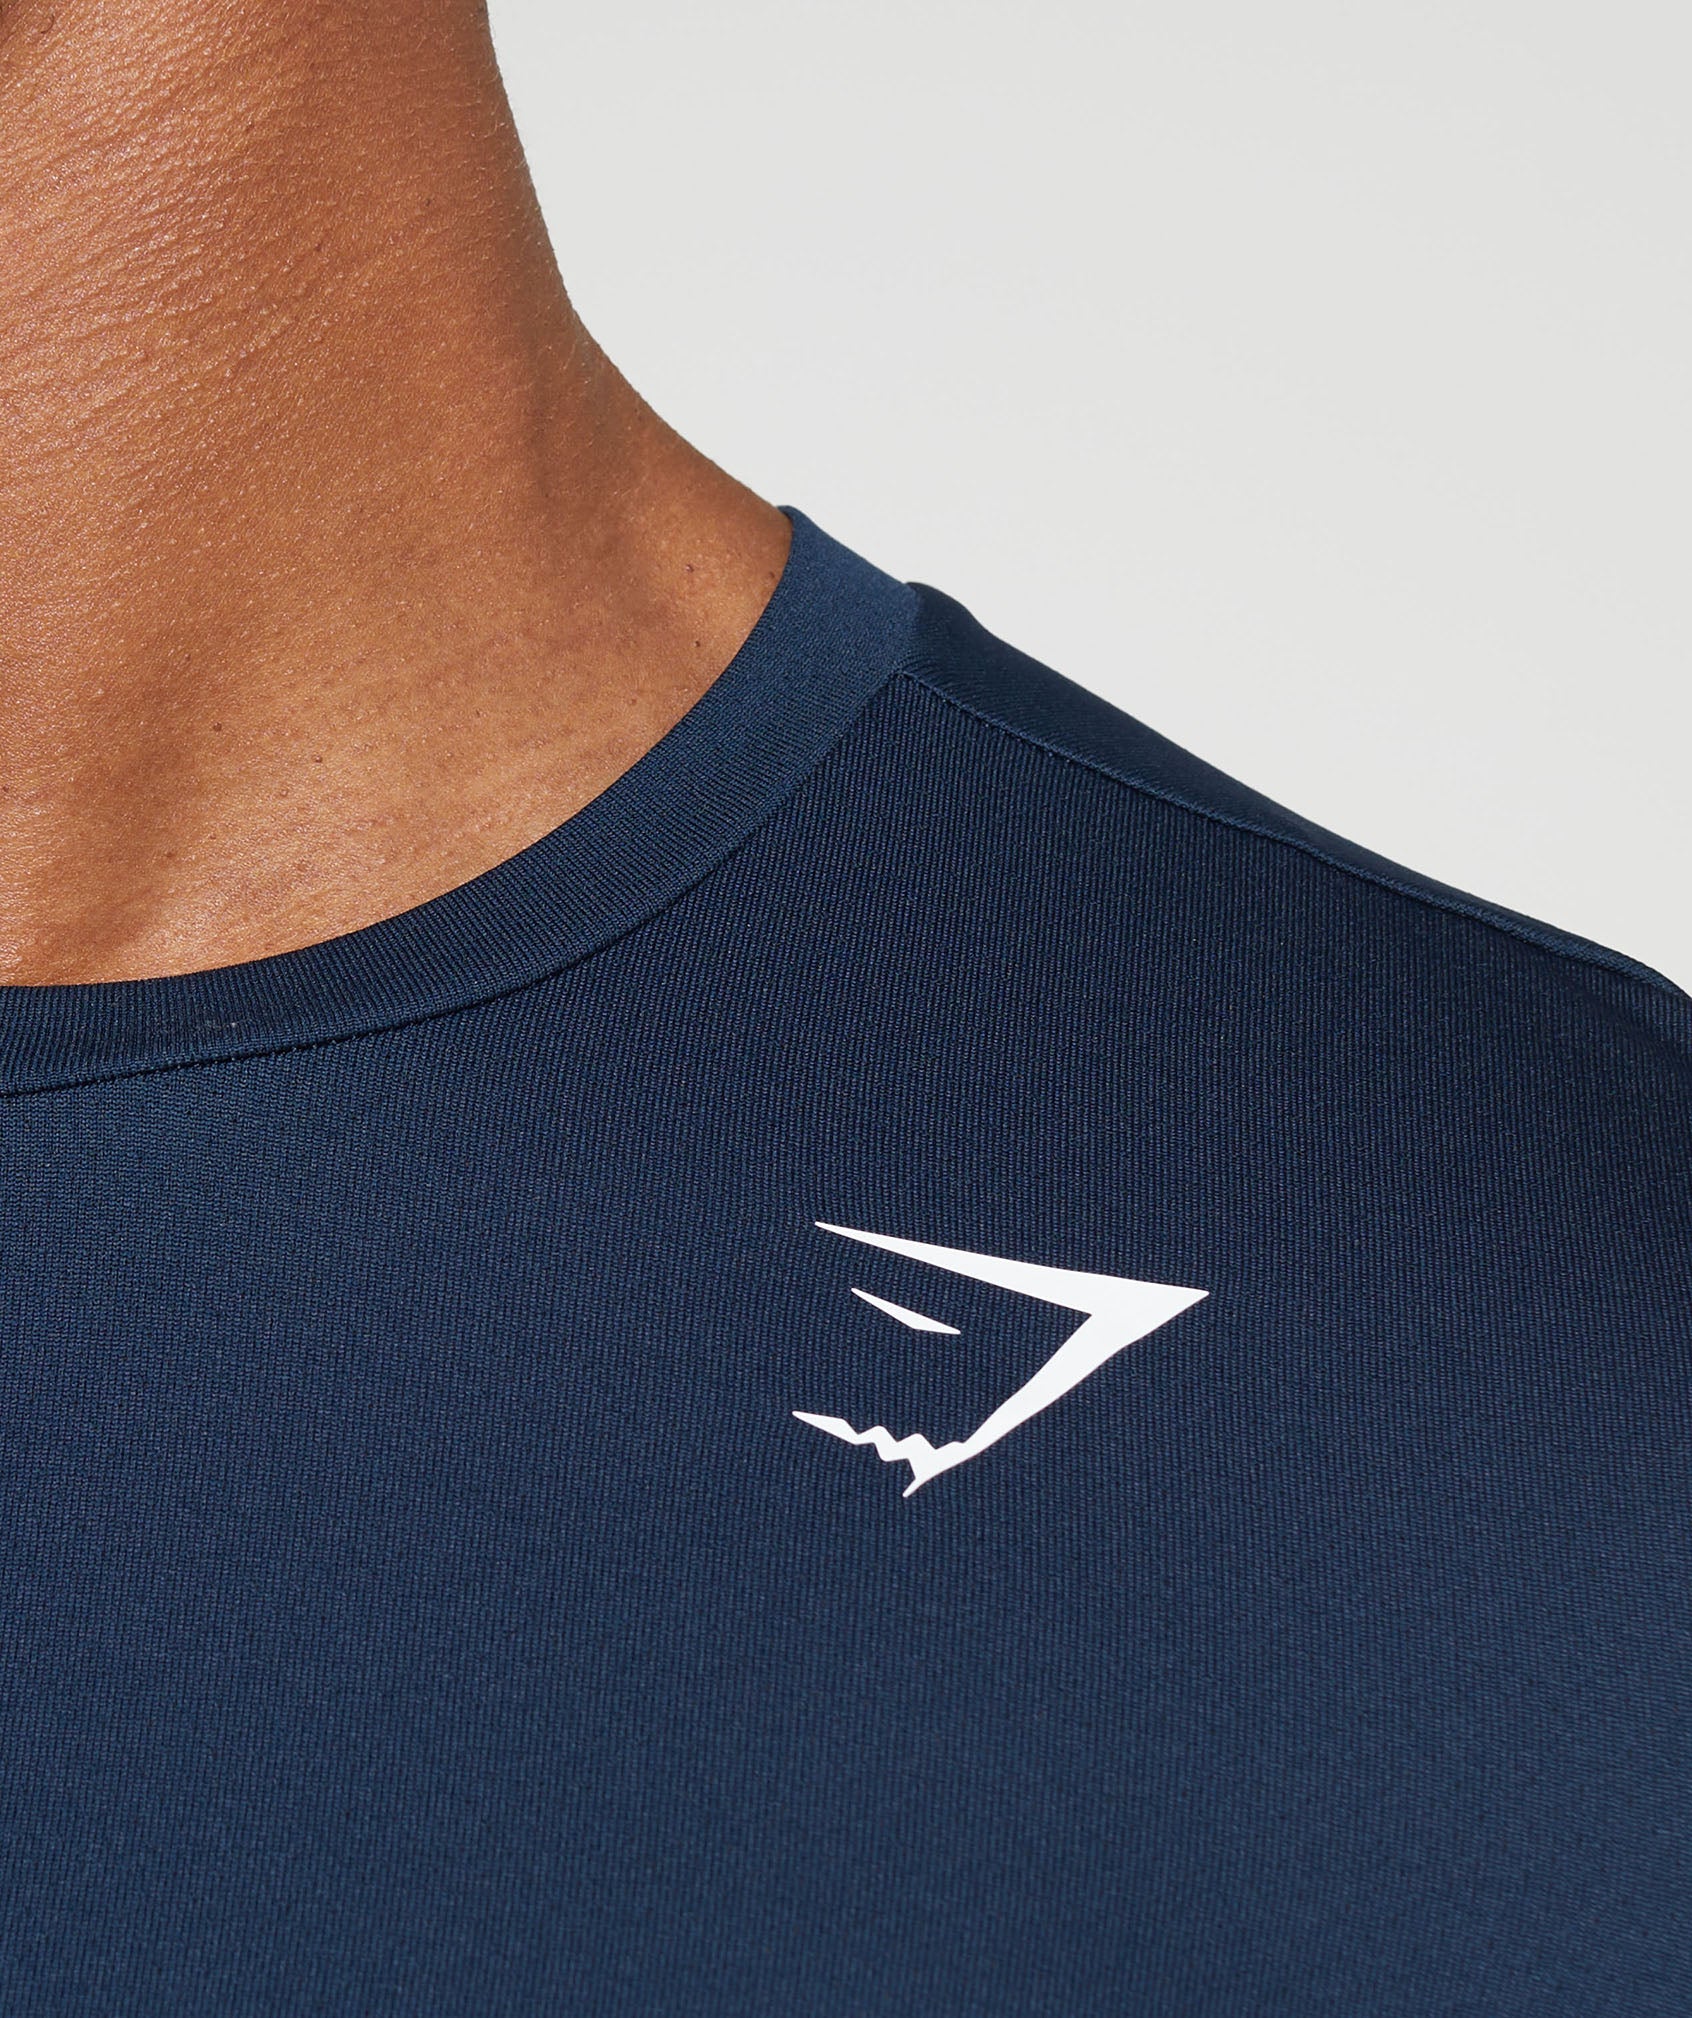 Arrival Long Sleeve T-Shirt in Navy - view 5